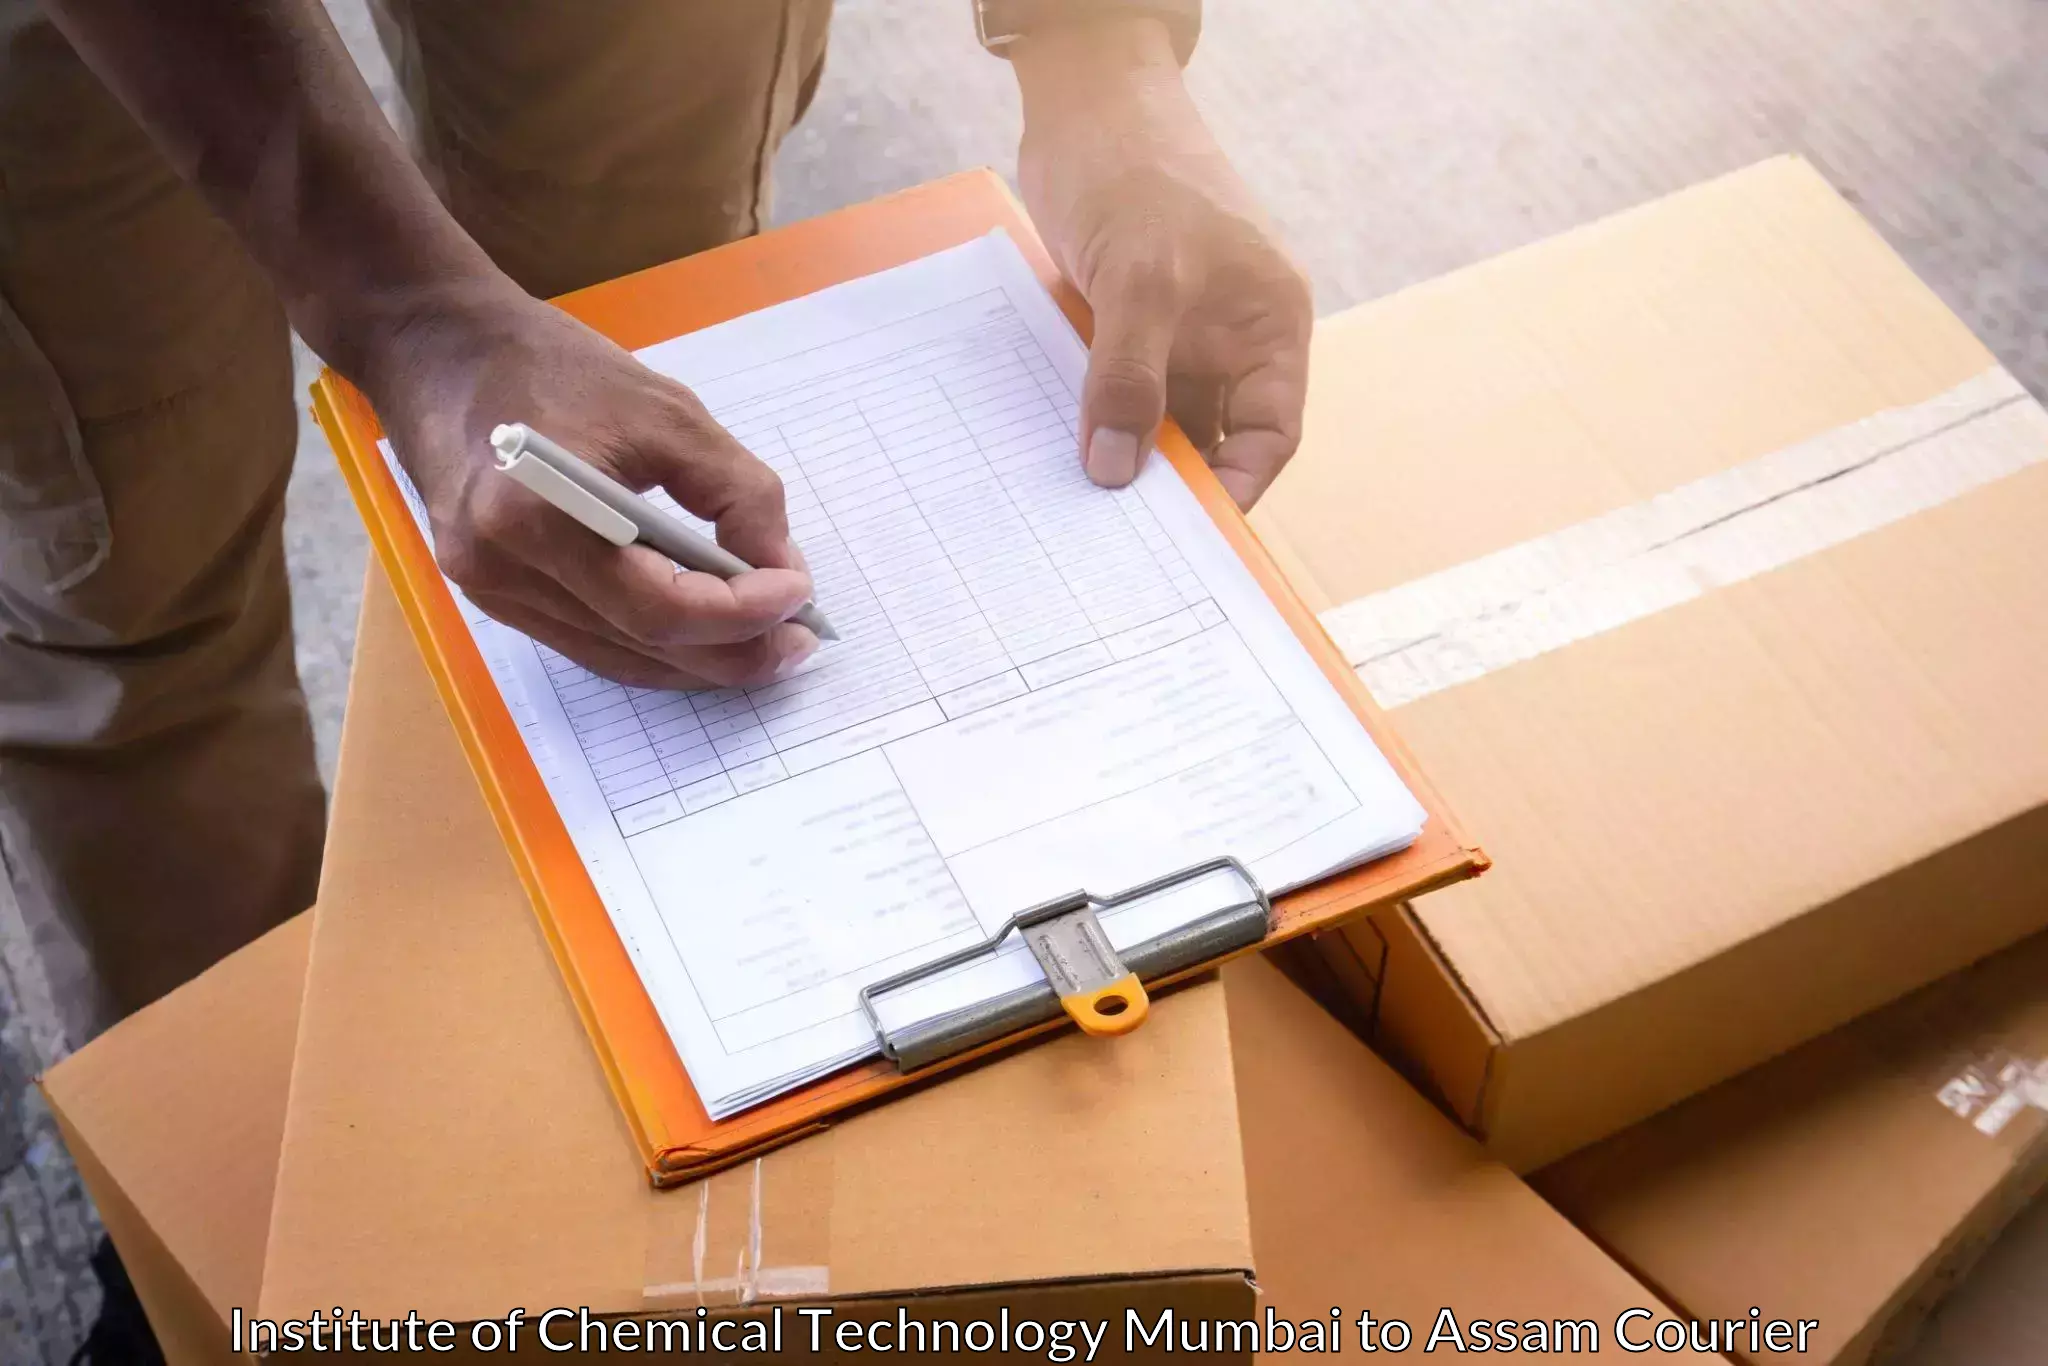 Efficient parcel tracking Institute of Chemical Technology Mumbai to Agomani